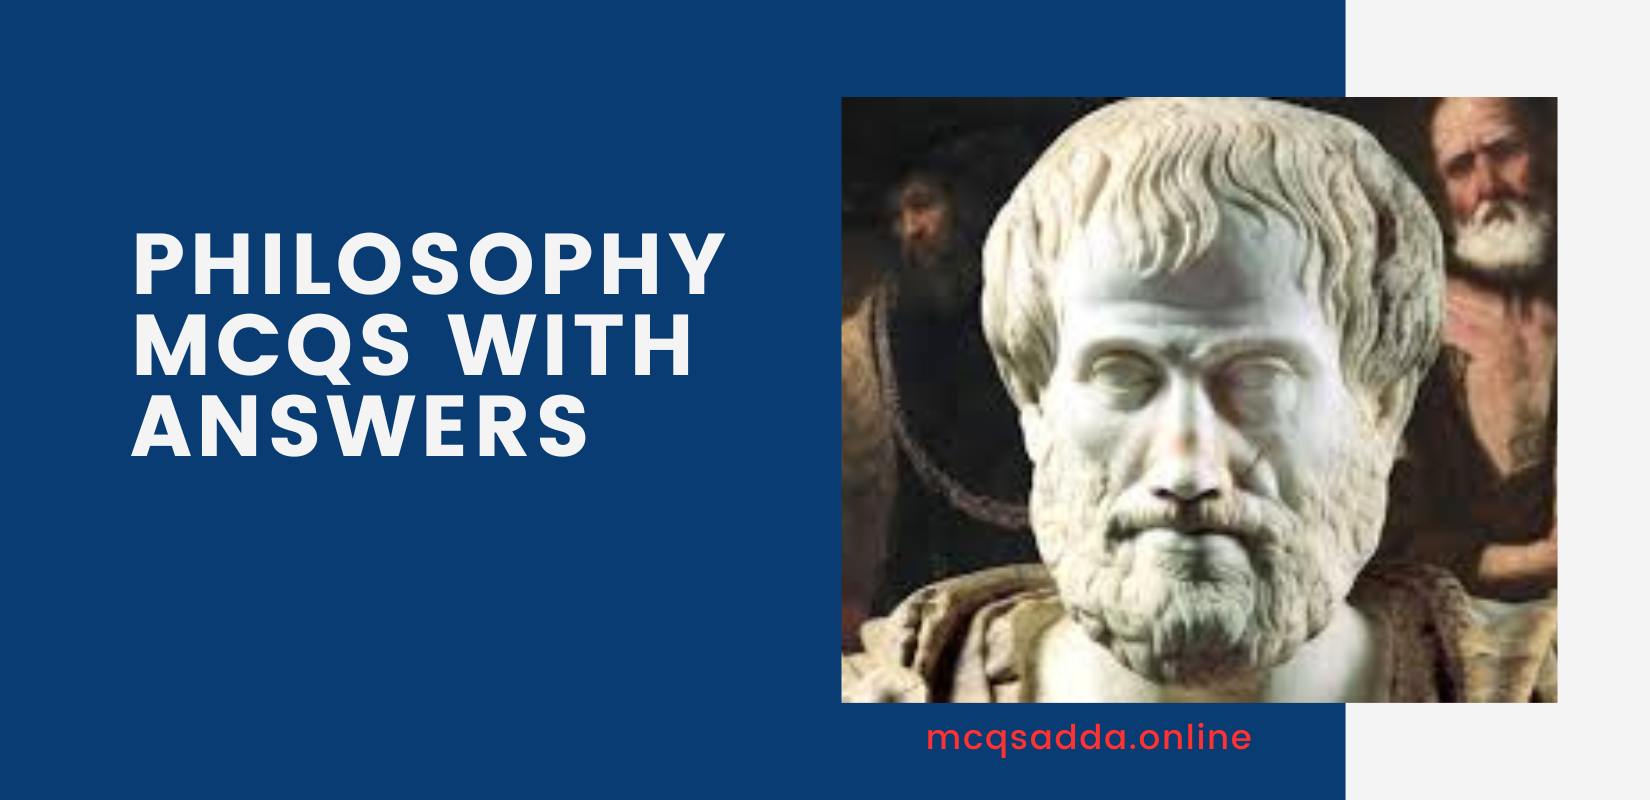 Philosophy MCQs with answers